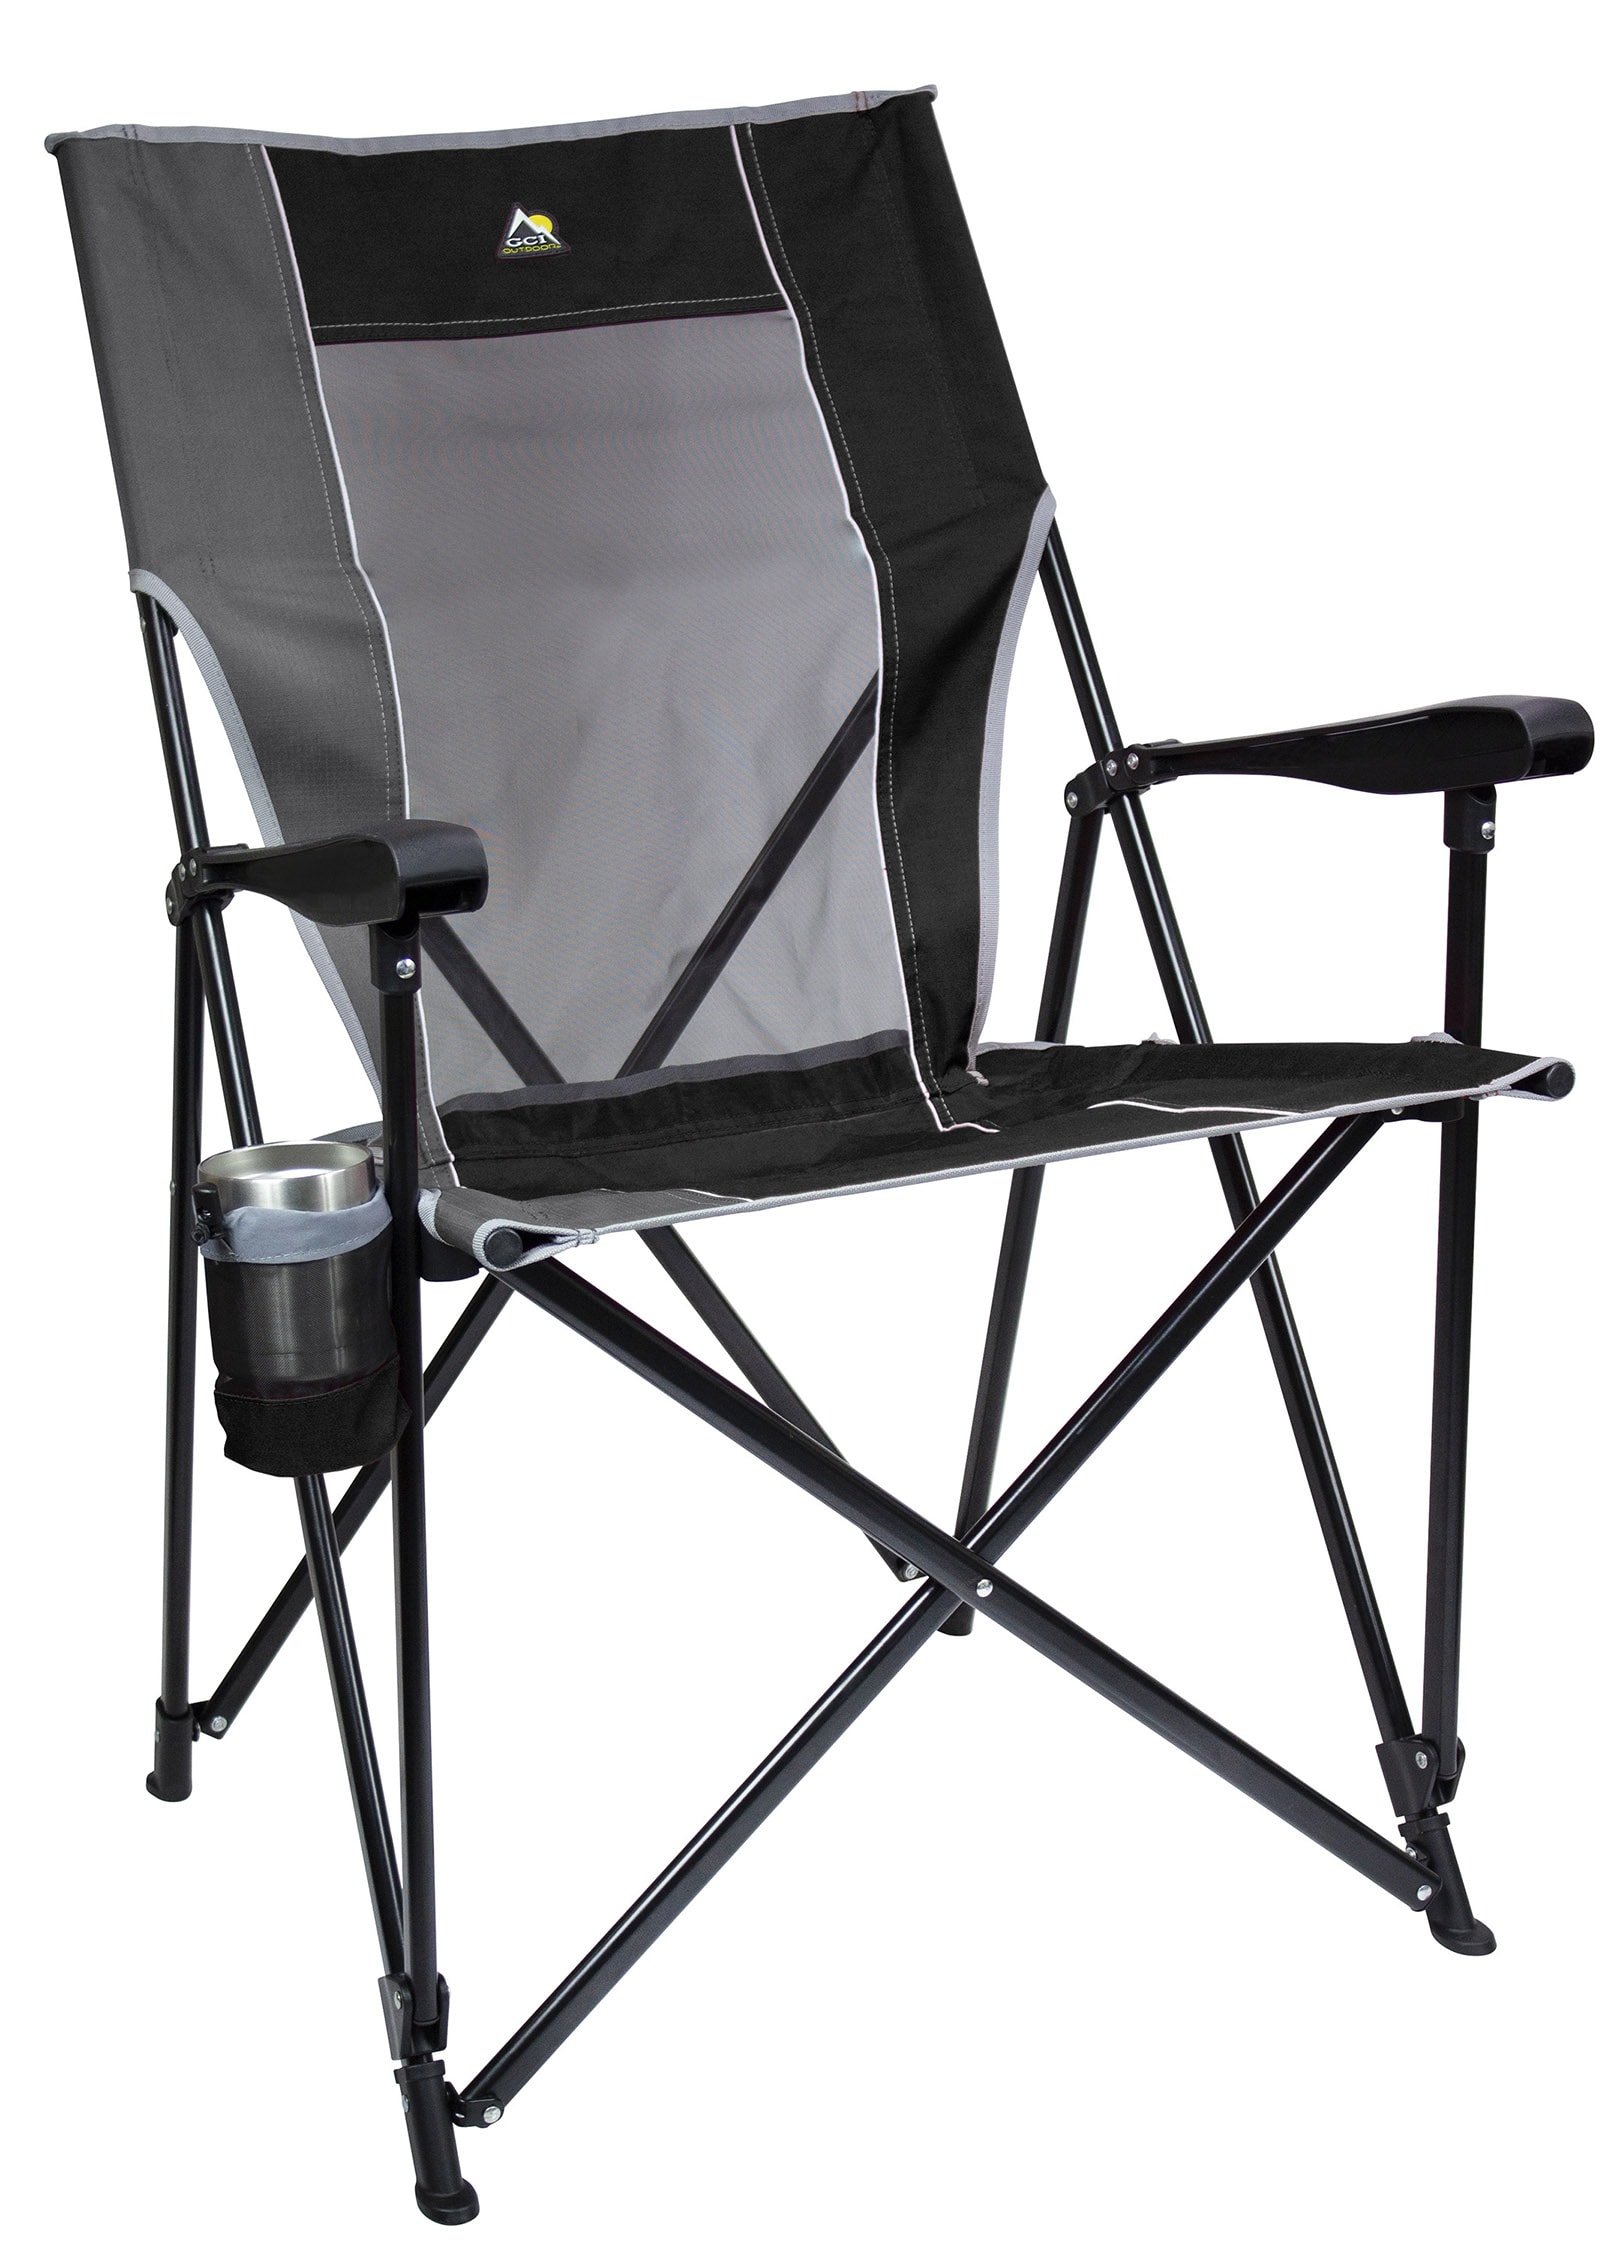 GCI Outdoor 371147 Freestyle Rocker with Side Table, Regular